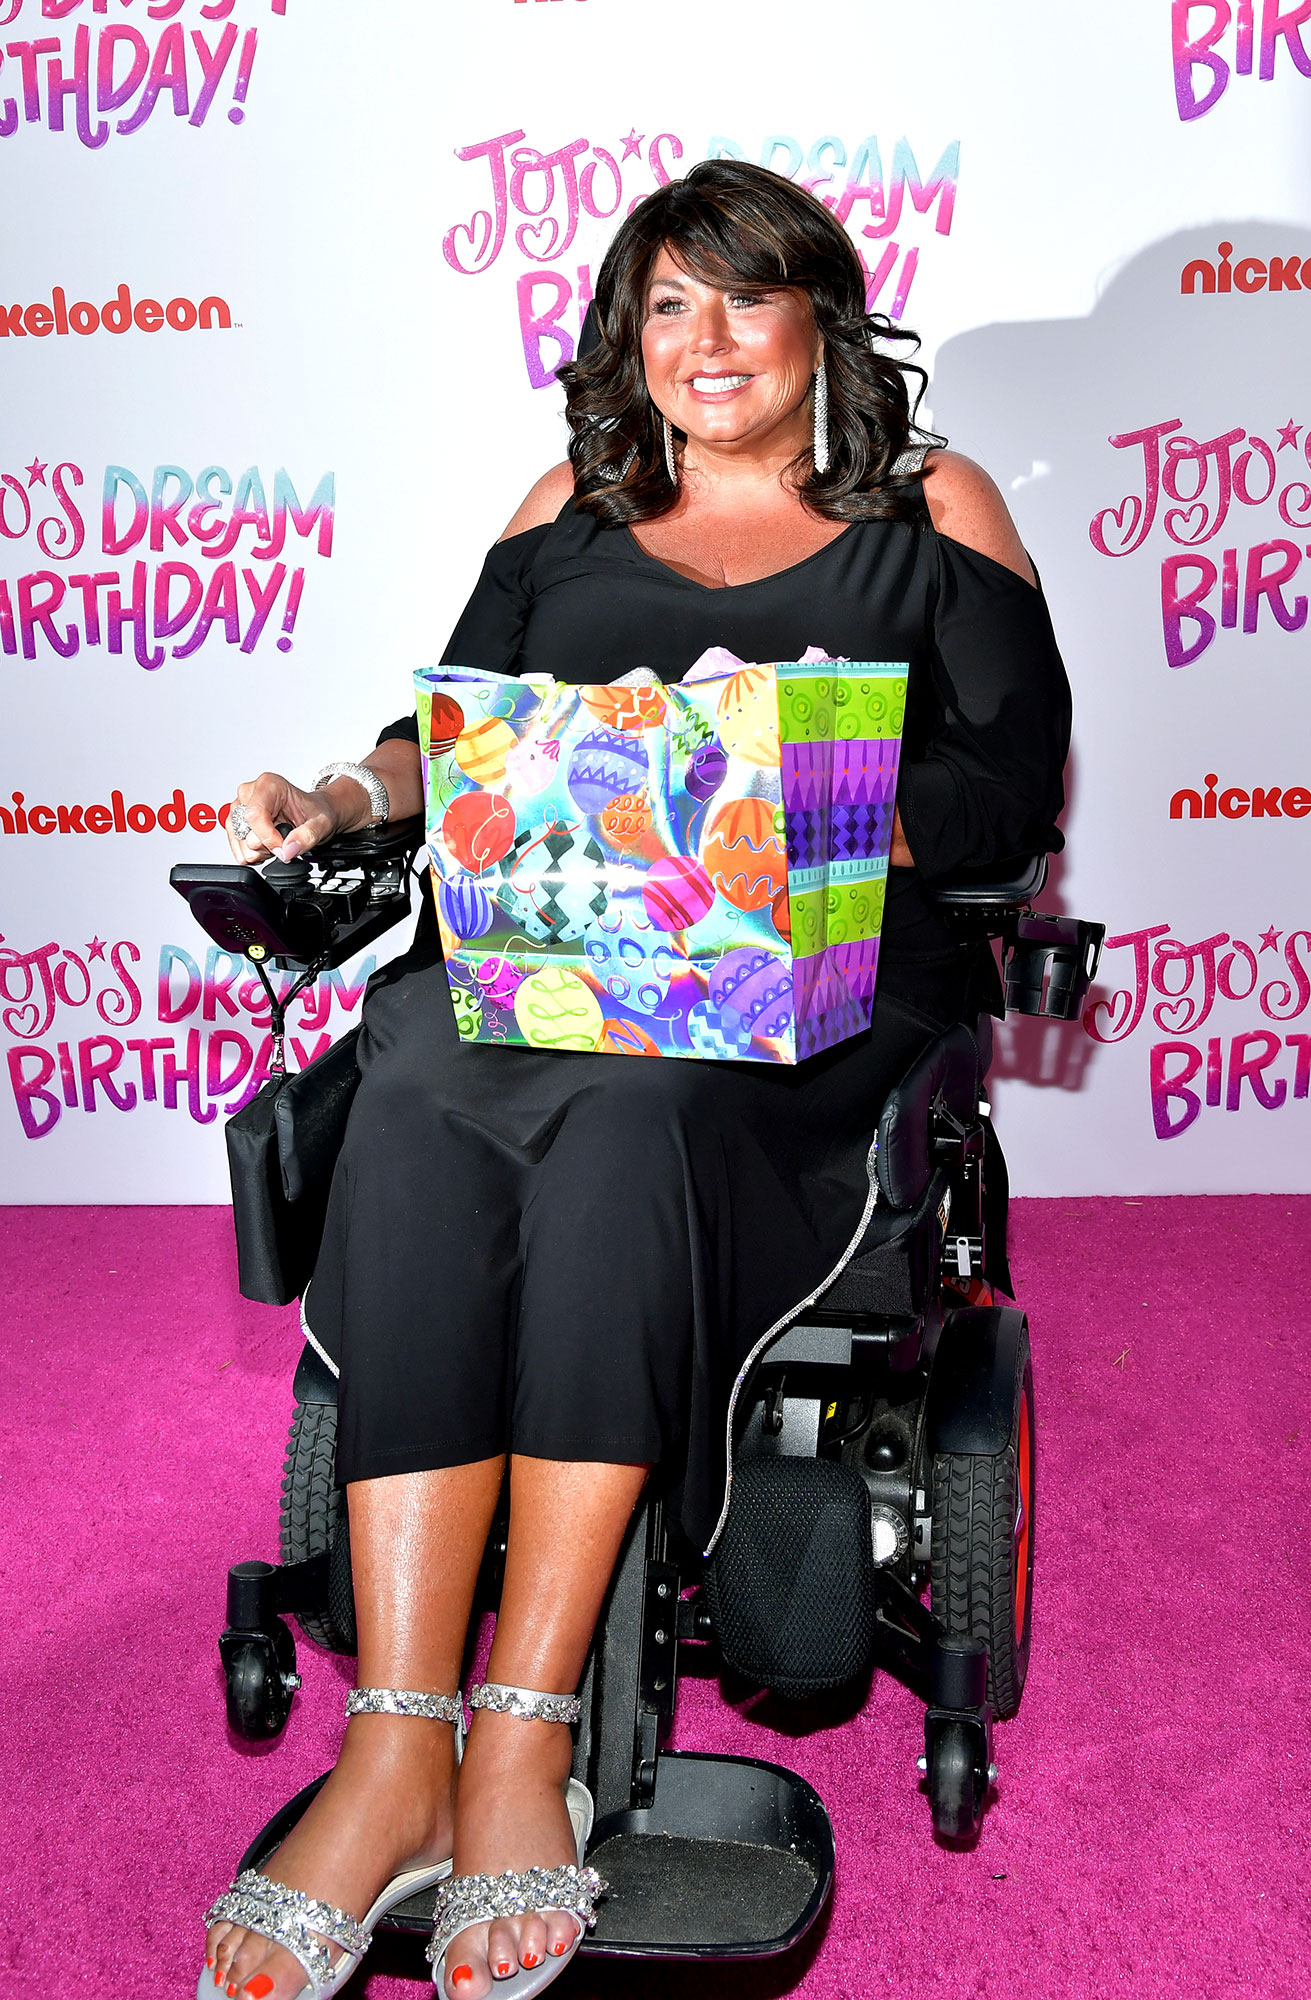 Abby Lee Miller reflects on painful cancer battle as she marks